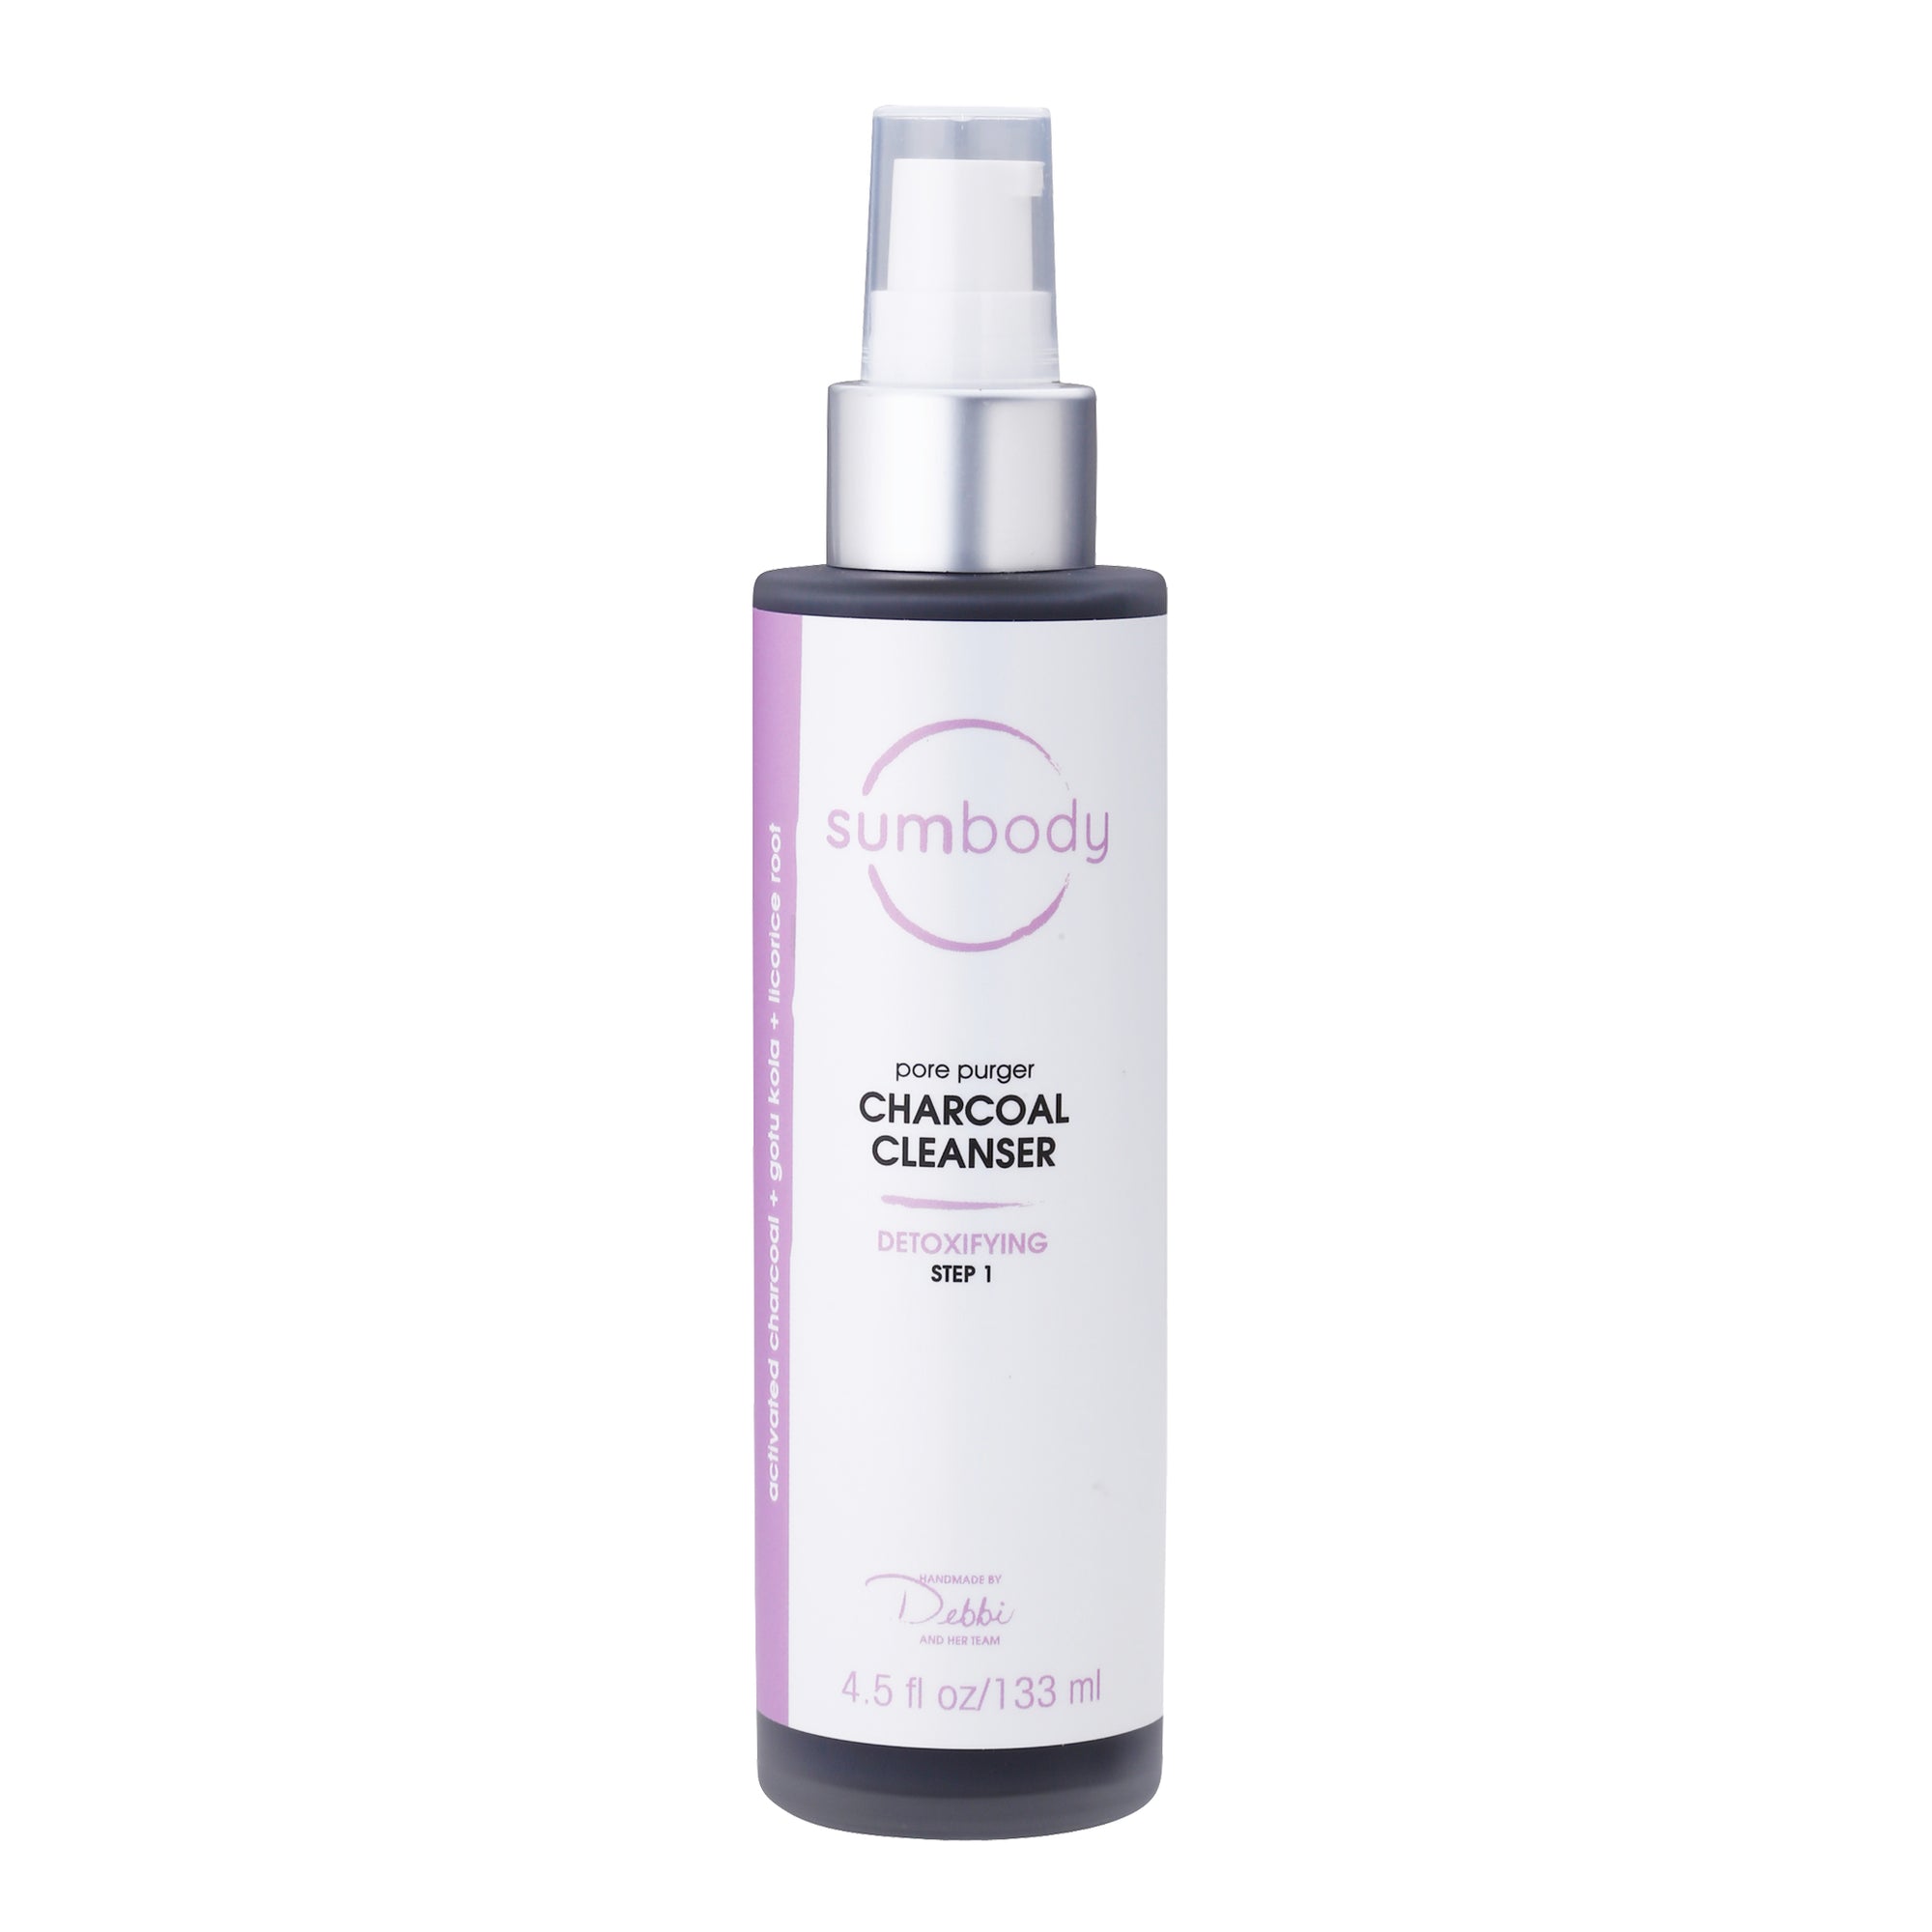 Pore Purger Charcoal Cleanser